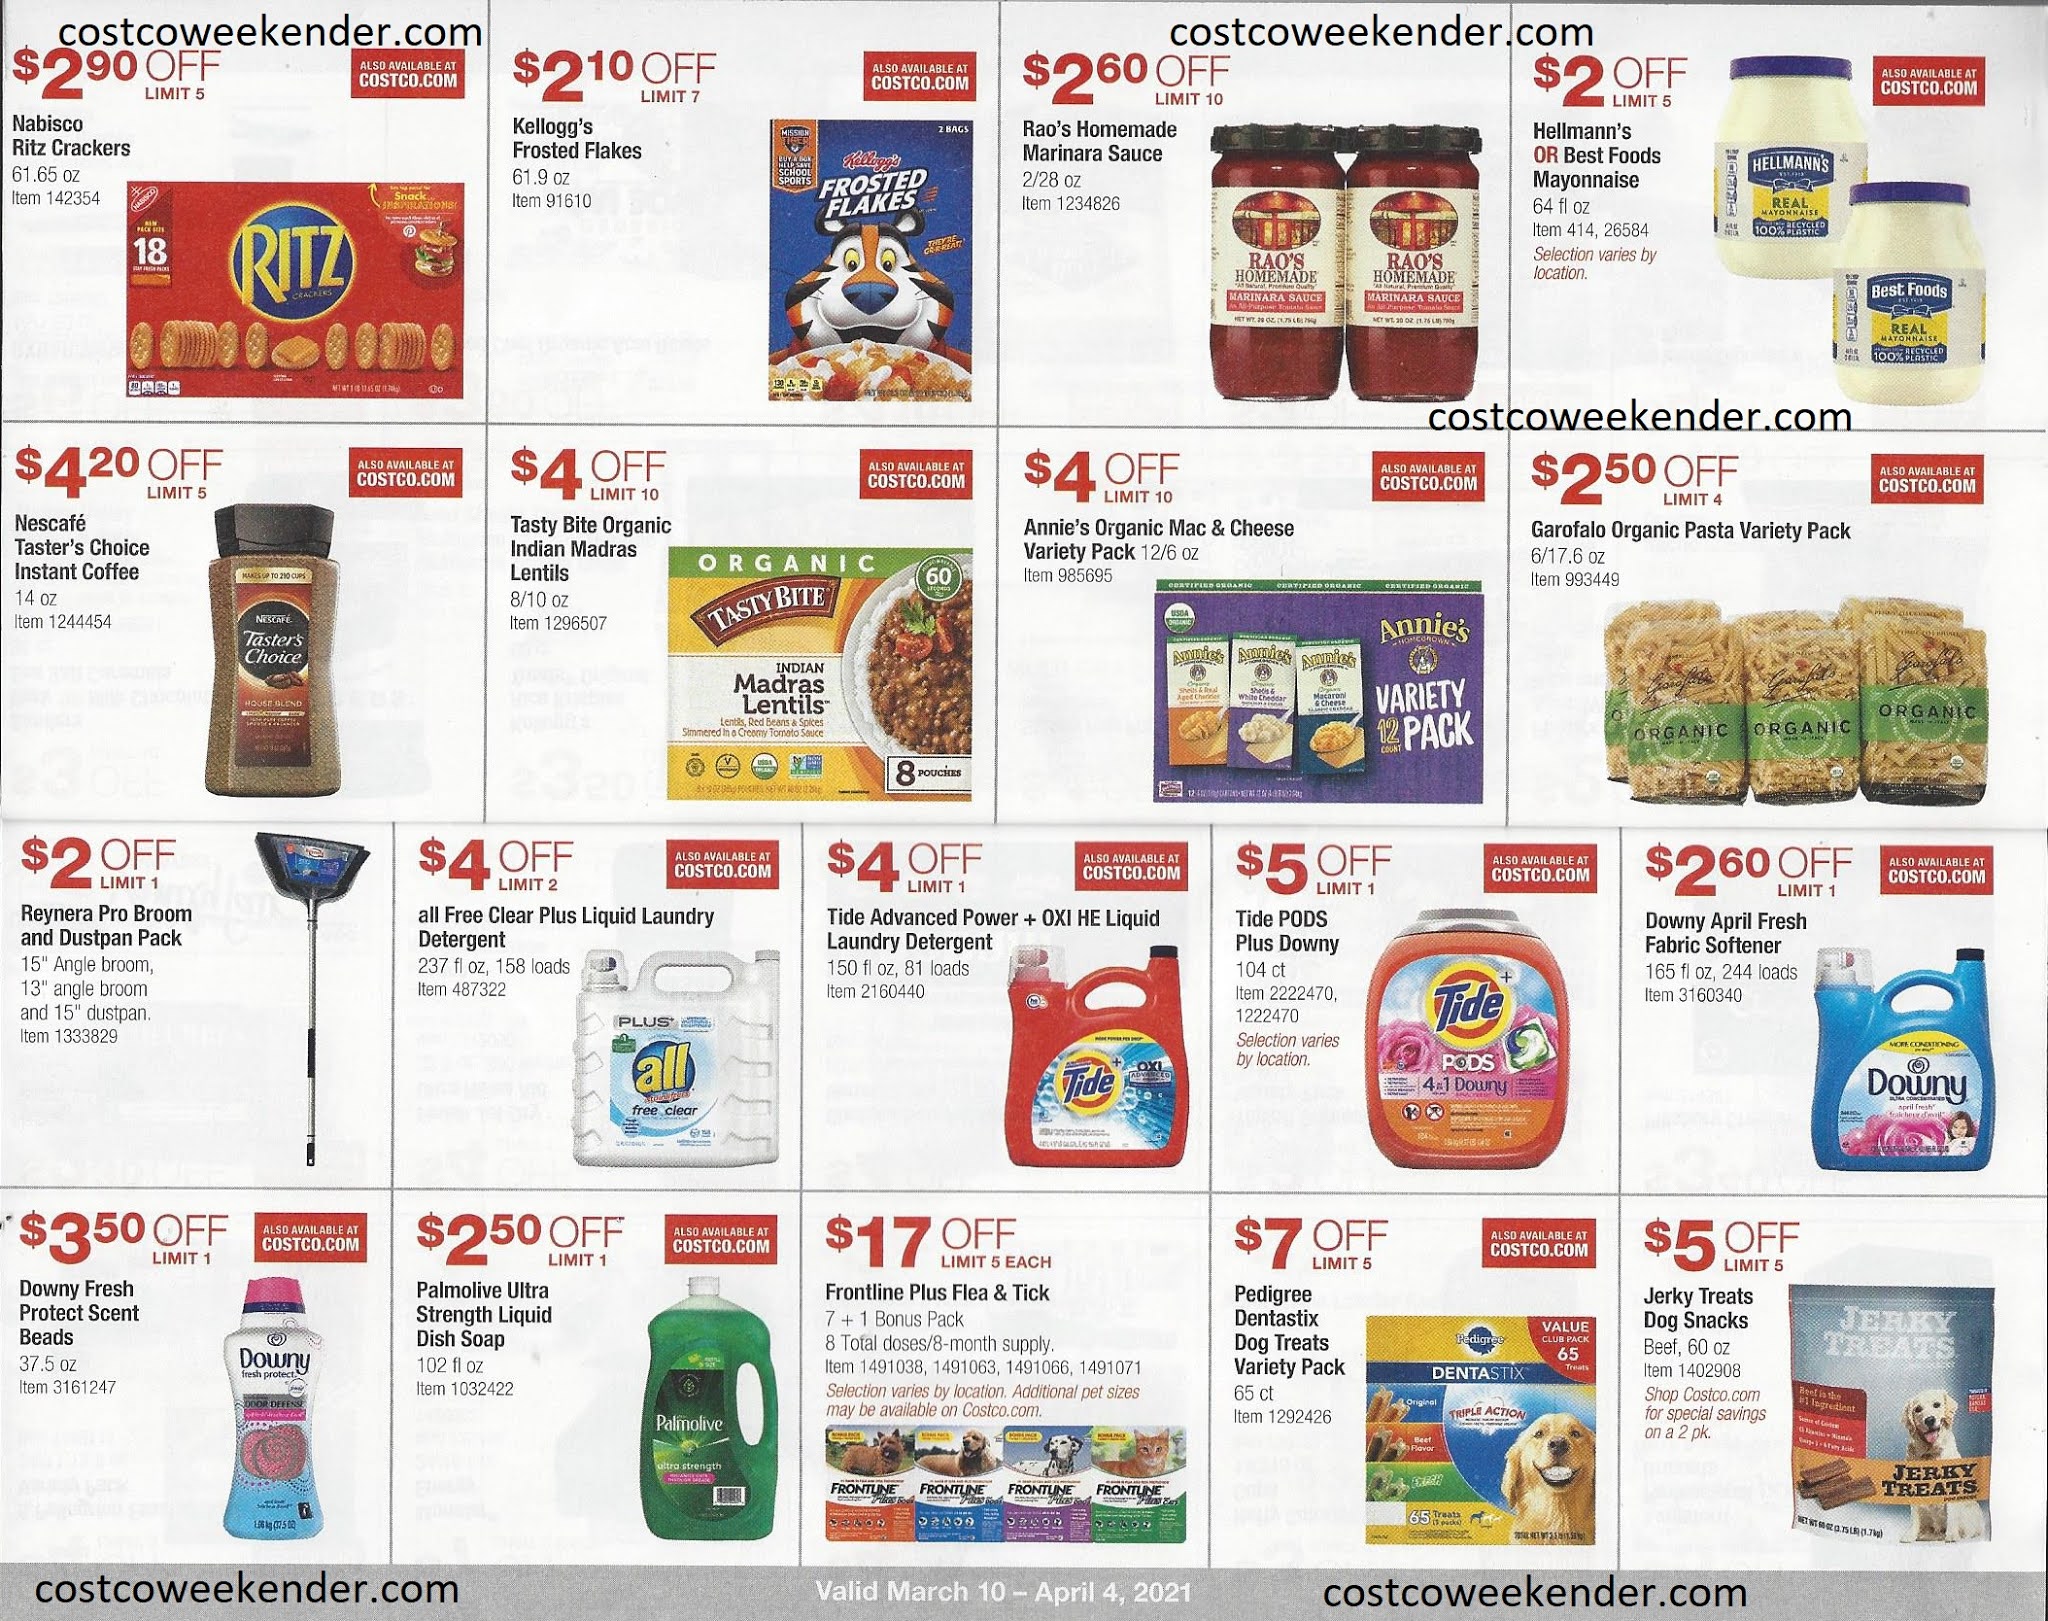 4. "Costco Coupon Book" - A section on the Costco website where members can find current discounts and coupons - wide 5